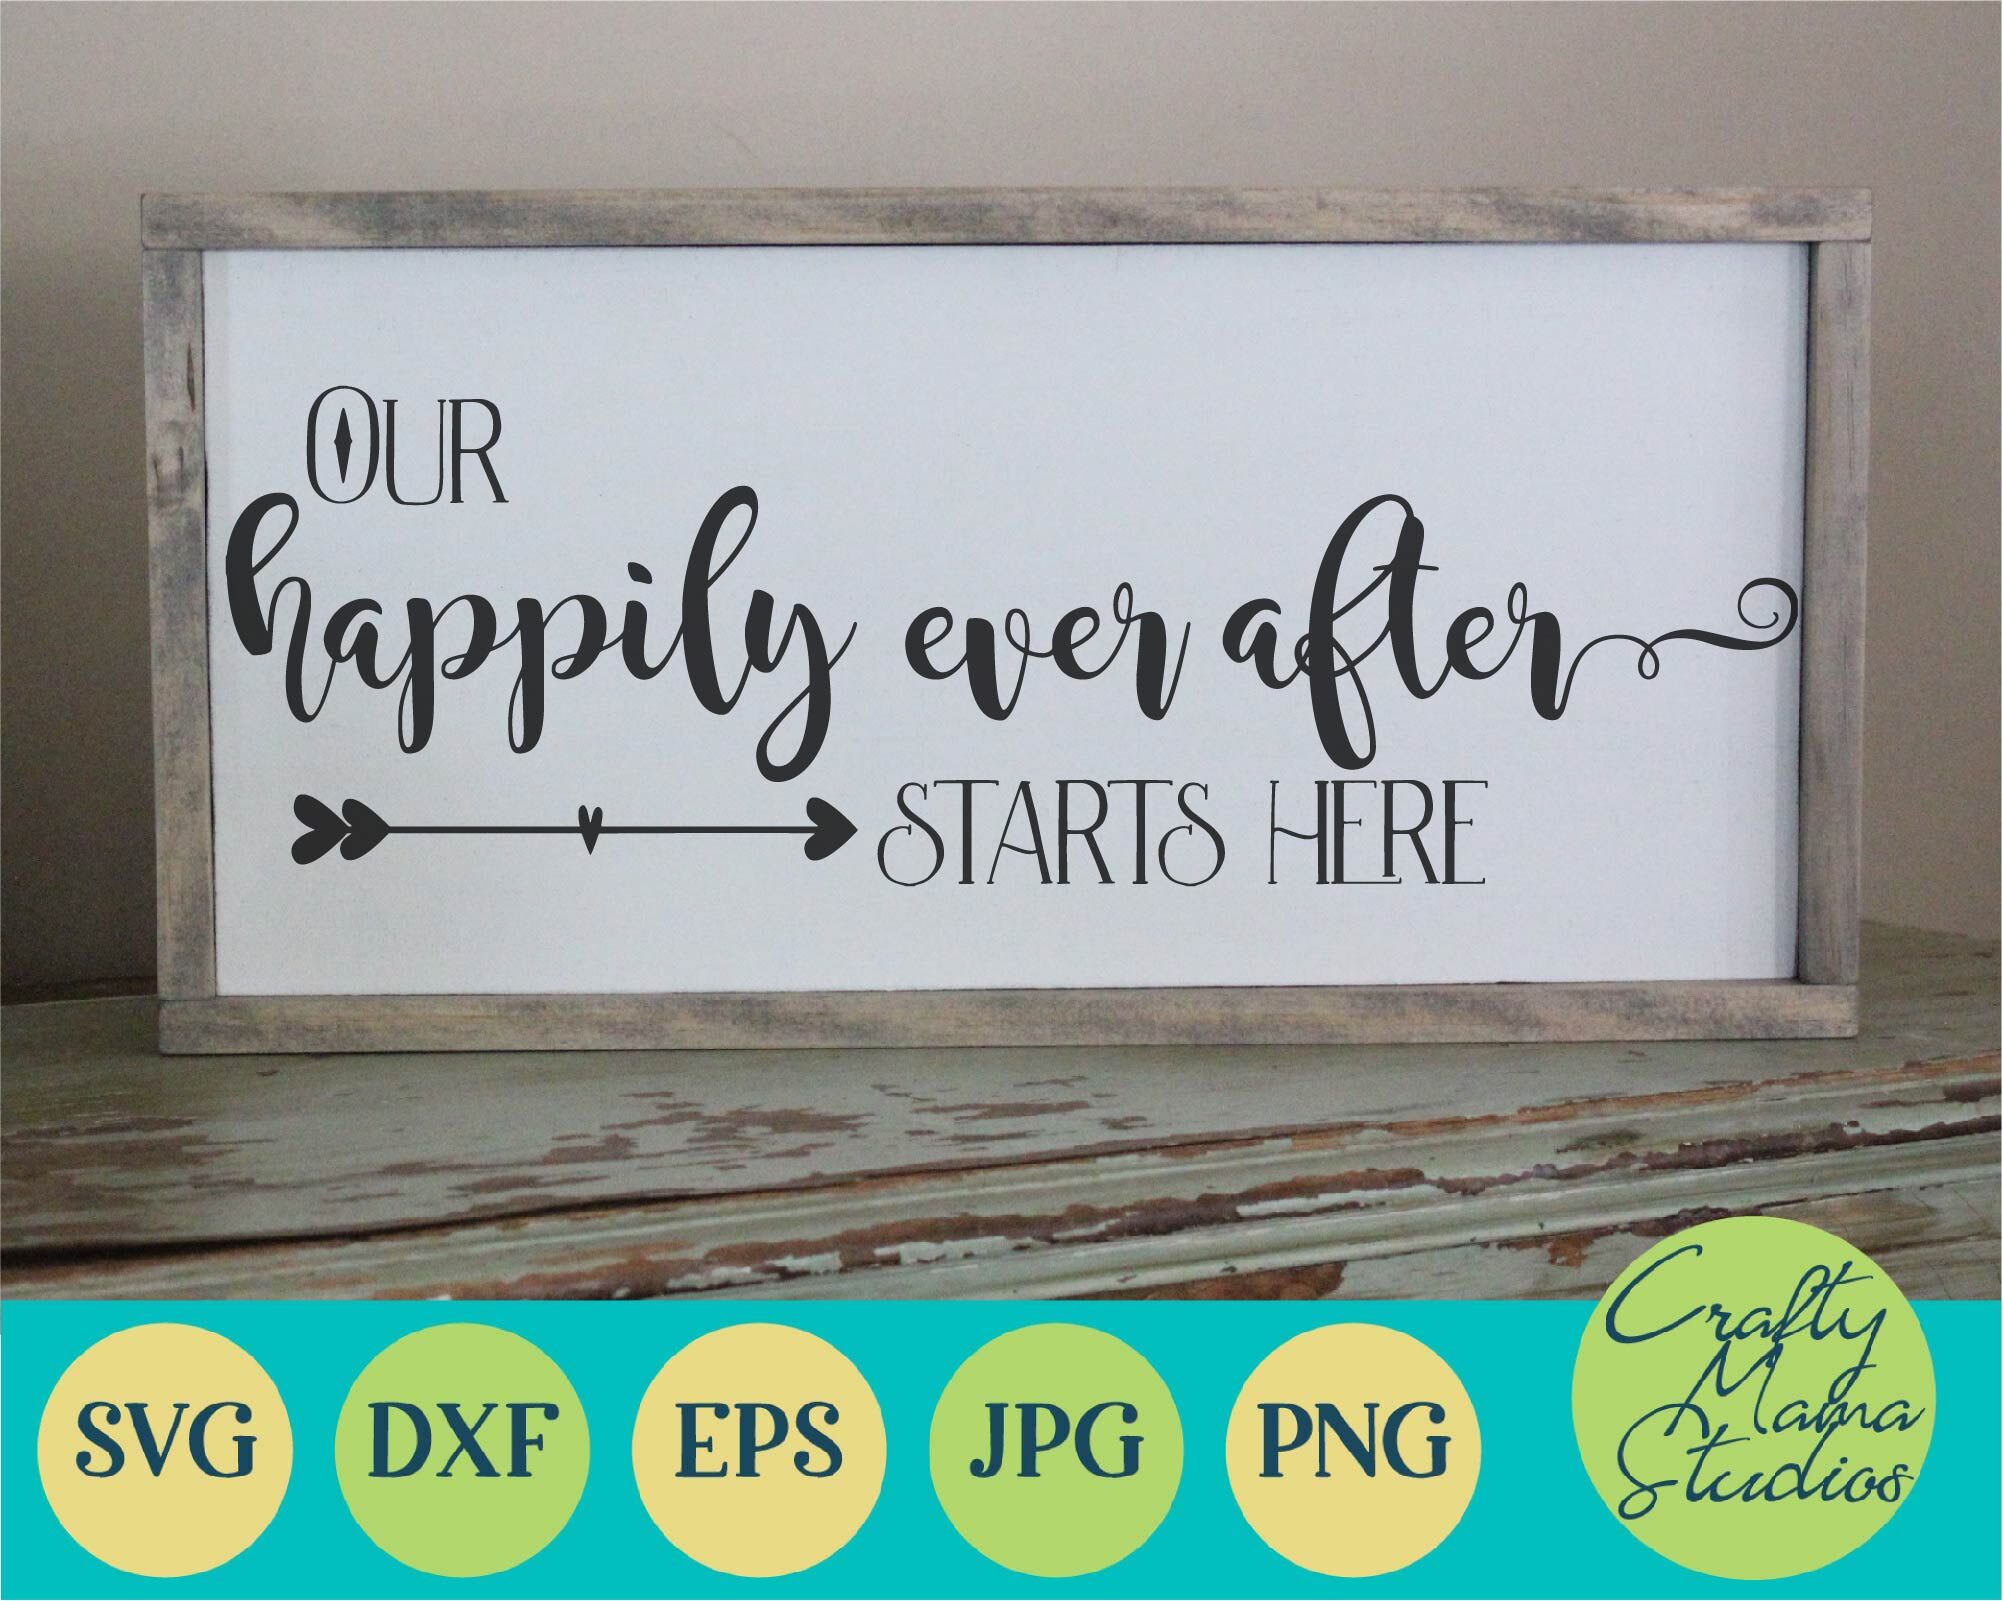 Our Happily Ever After Starts Here Svg Wedding Svg Marriage By Crafty Mama Studios Thehungryjpeg Com